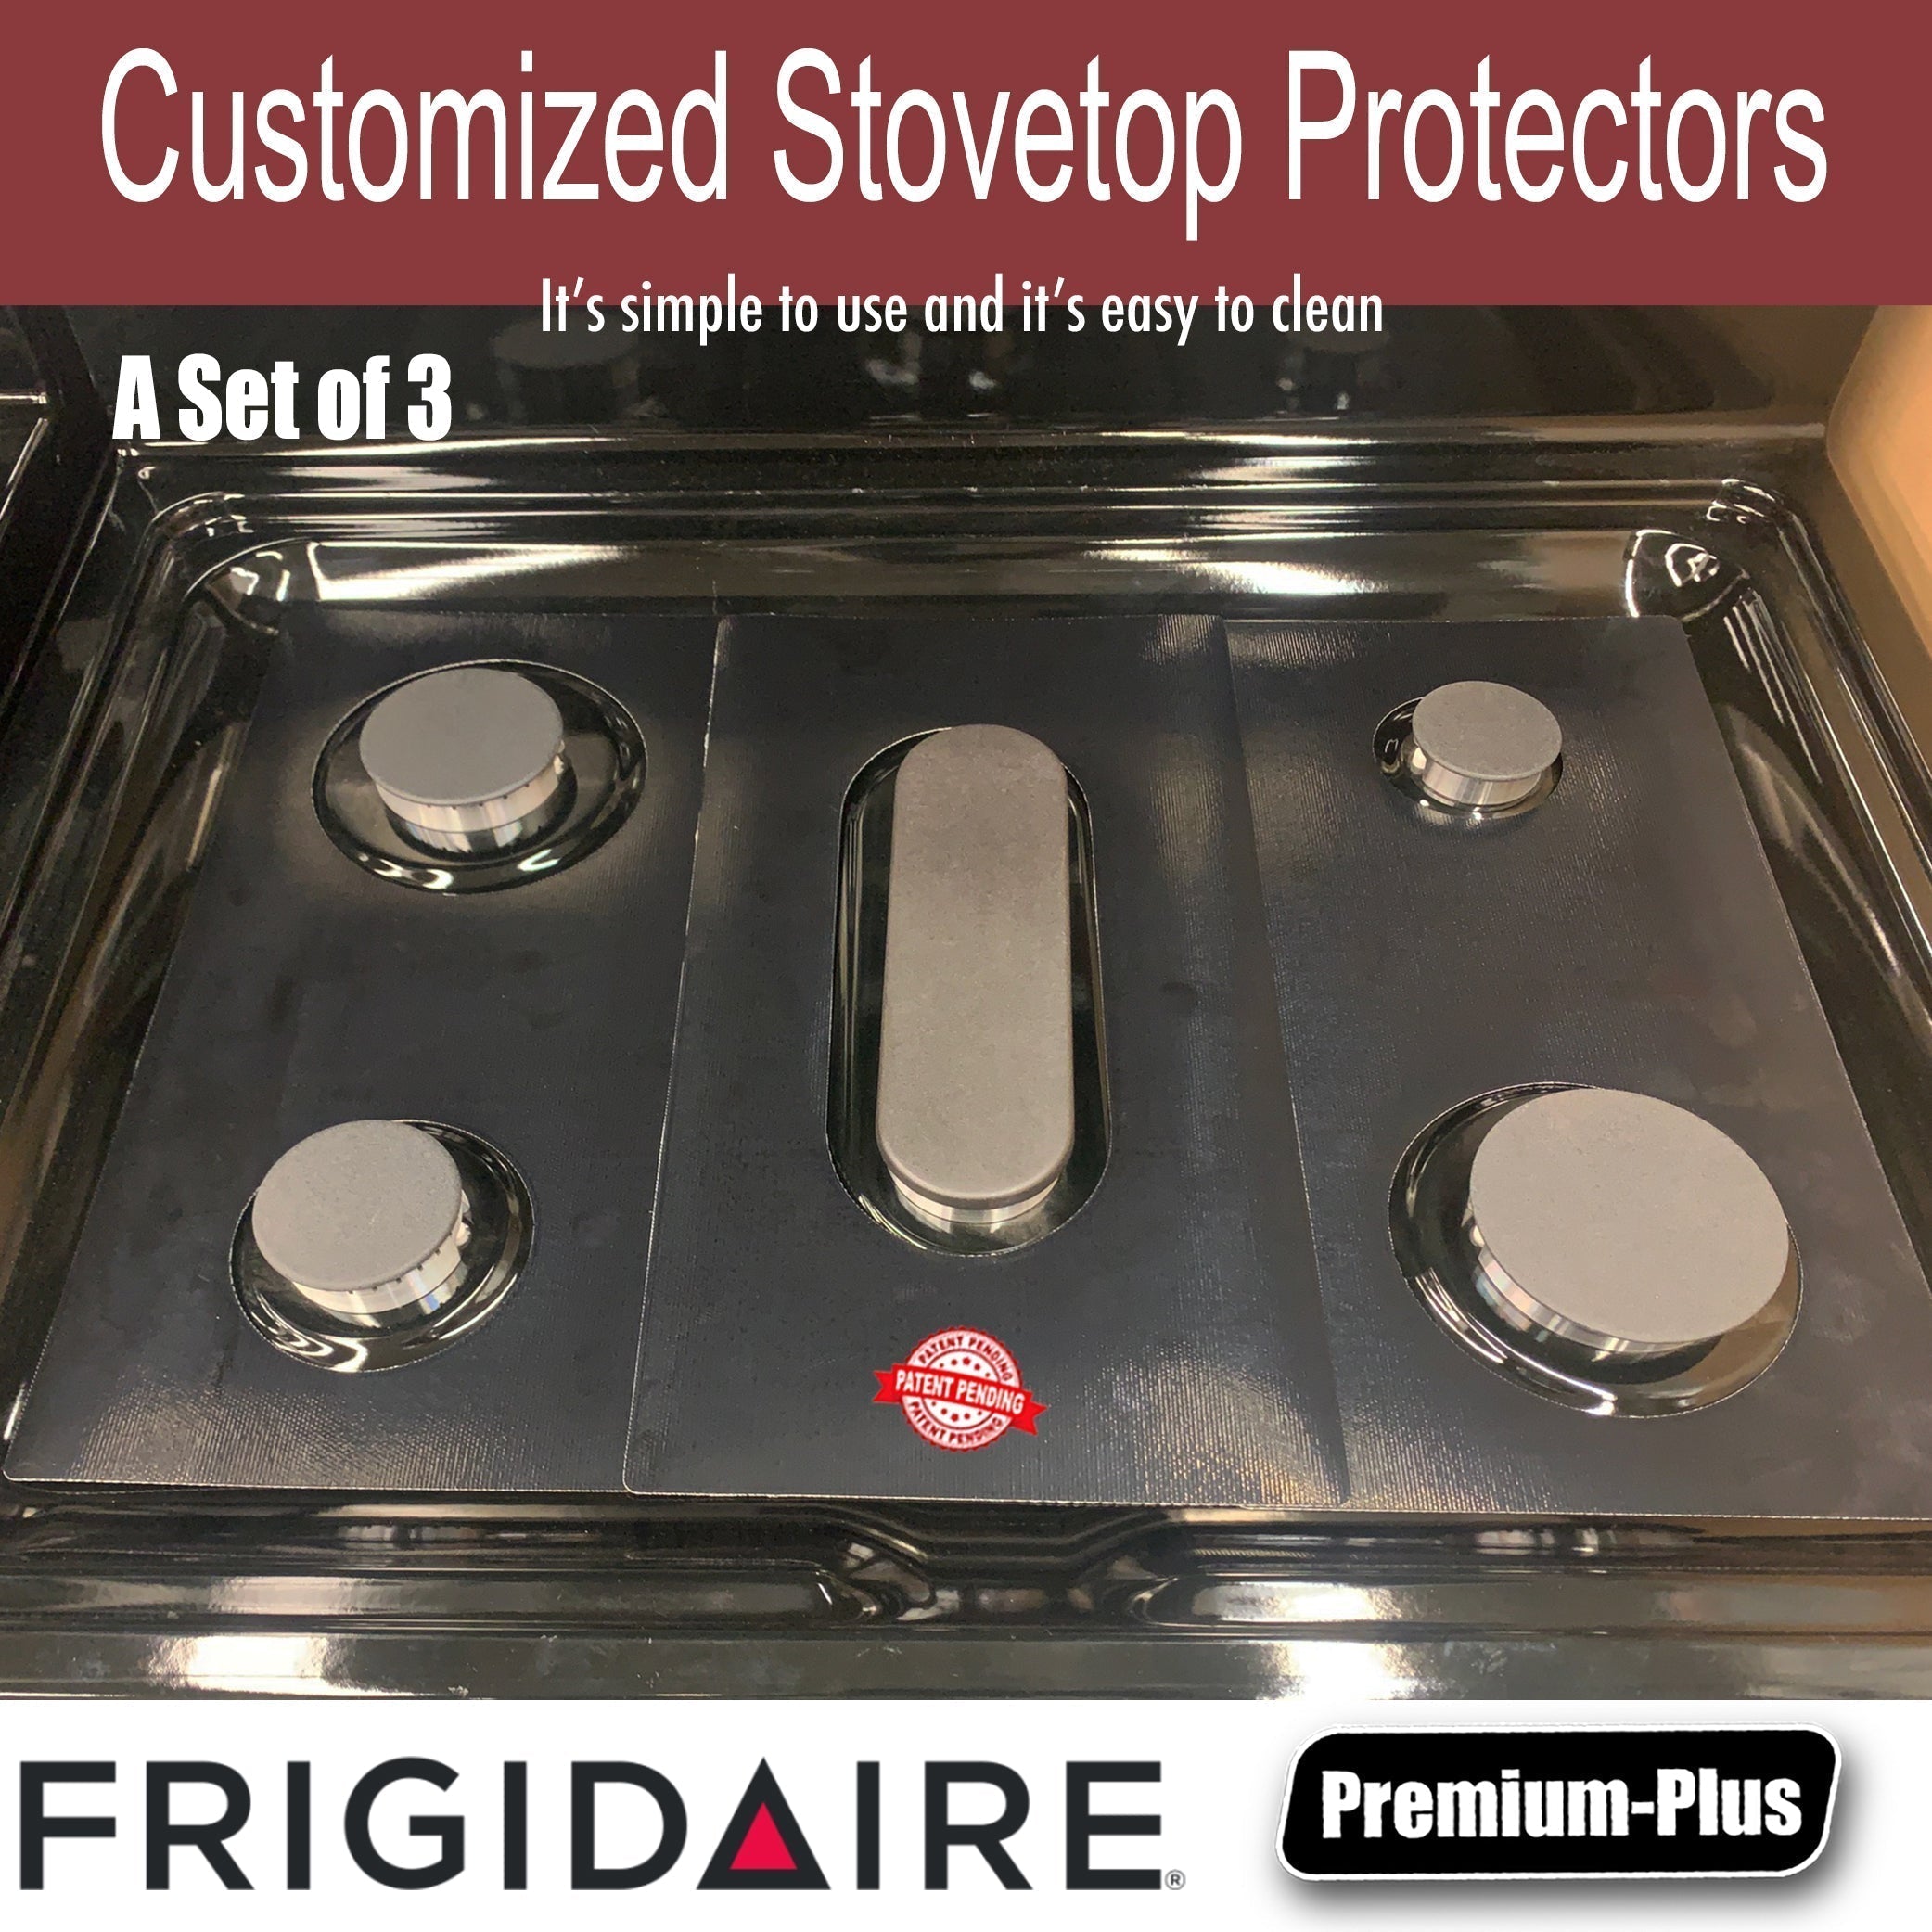 Frigidaire Stove Protector Liners - Stove Top Protector for